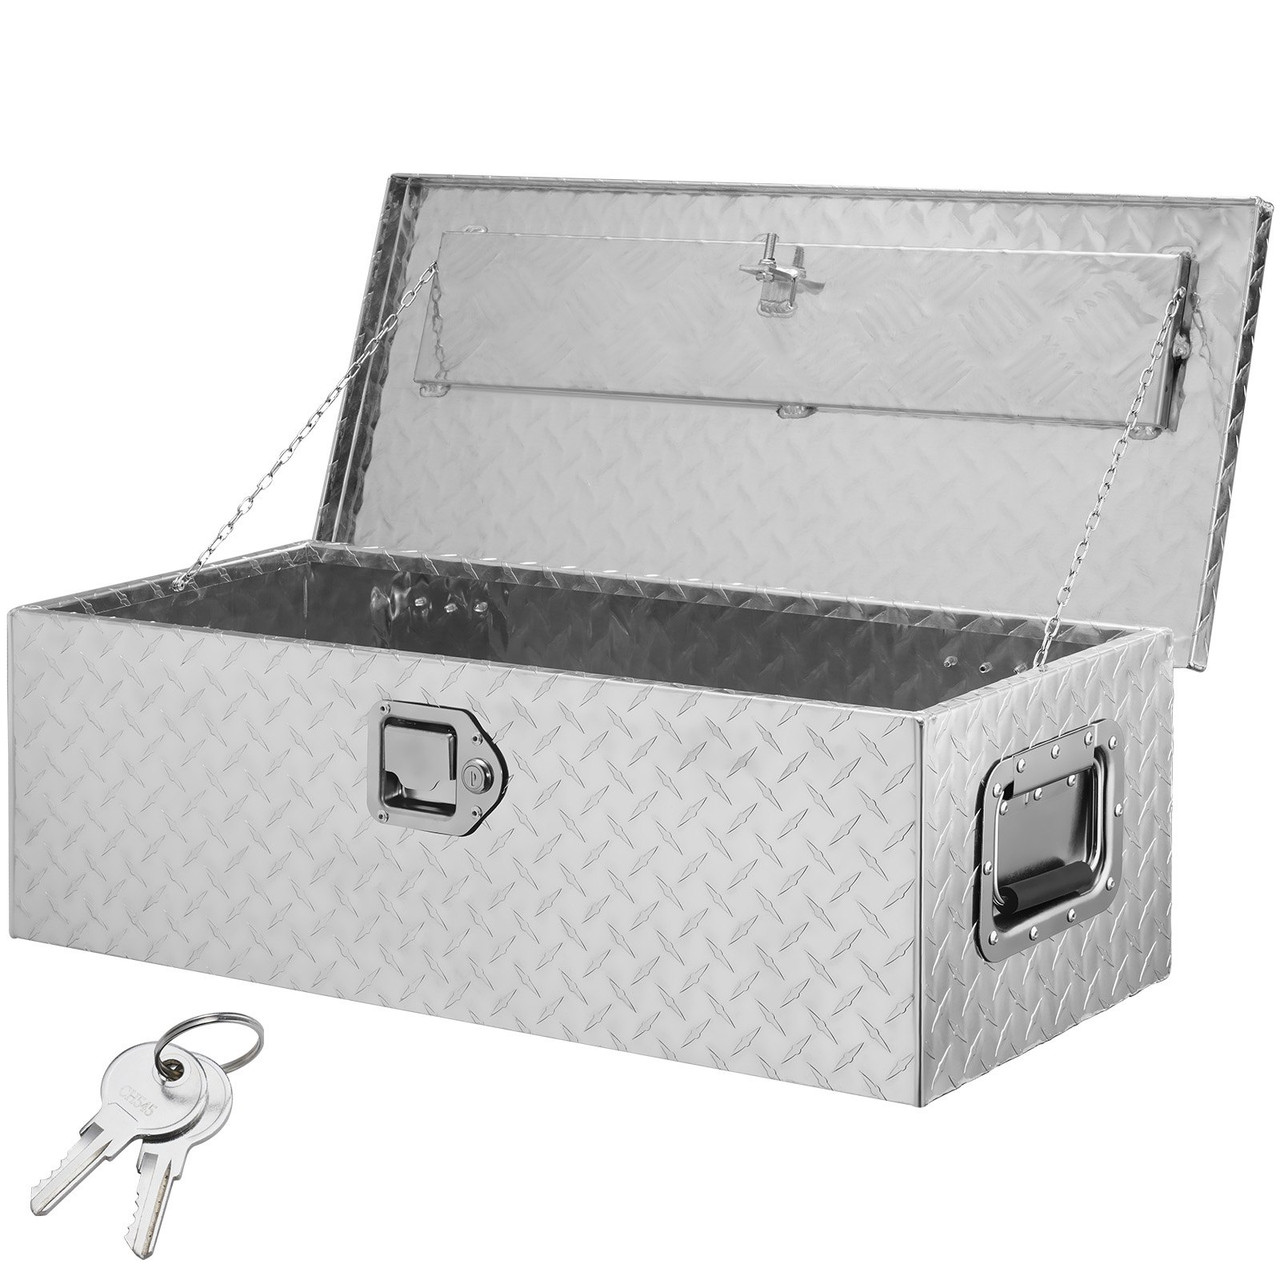 Heavy Duty Aluminum Truck Bed Tool Box, Diamond Plate Tool Box with Side Handle and Lock Keys, Storage Tool Box Chest Box Organizer for Pickup, Truck Bed, RV, Trailer, 30"x13"x9.6", Silver